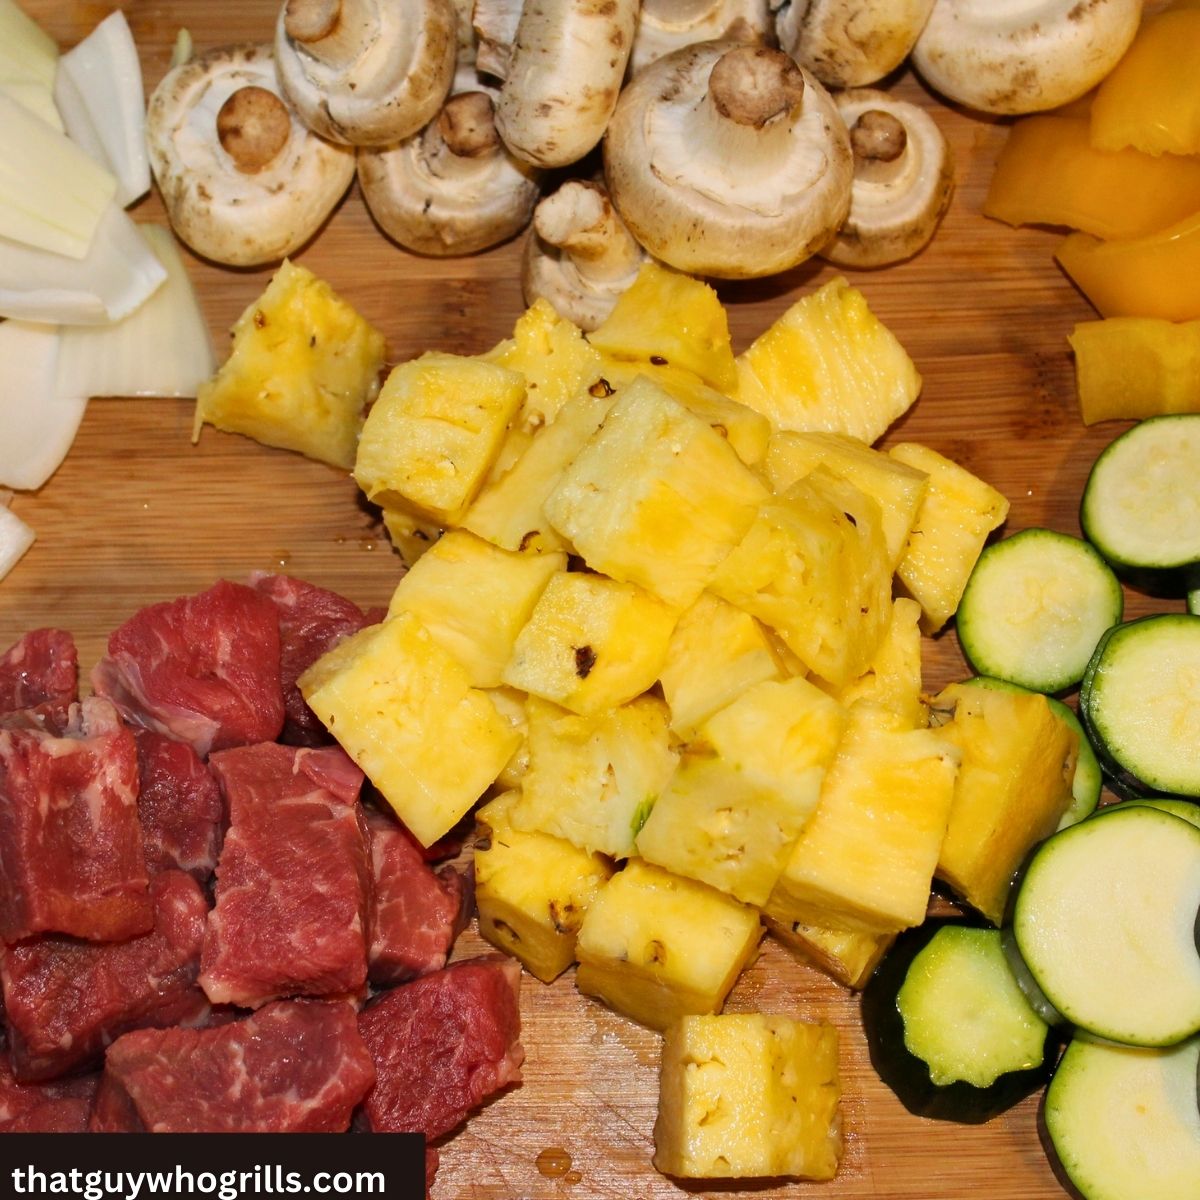 Cubed Steak on a cutting board with cut pineapple, sliced zucchini, mushrooms, yellow pepper, and white onions